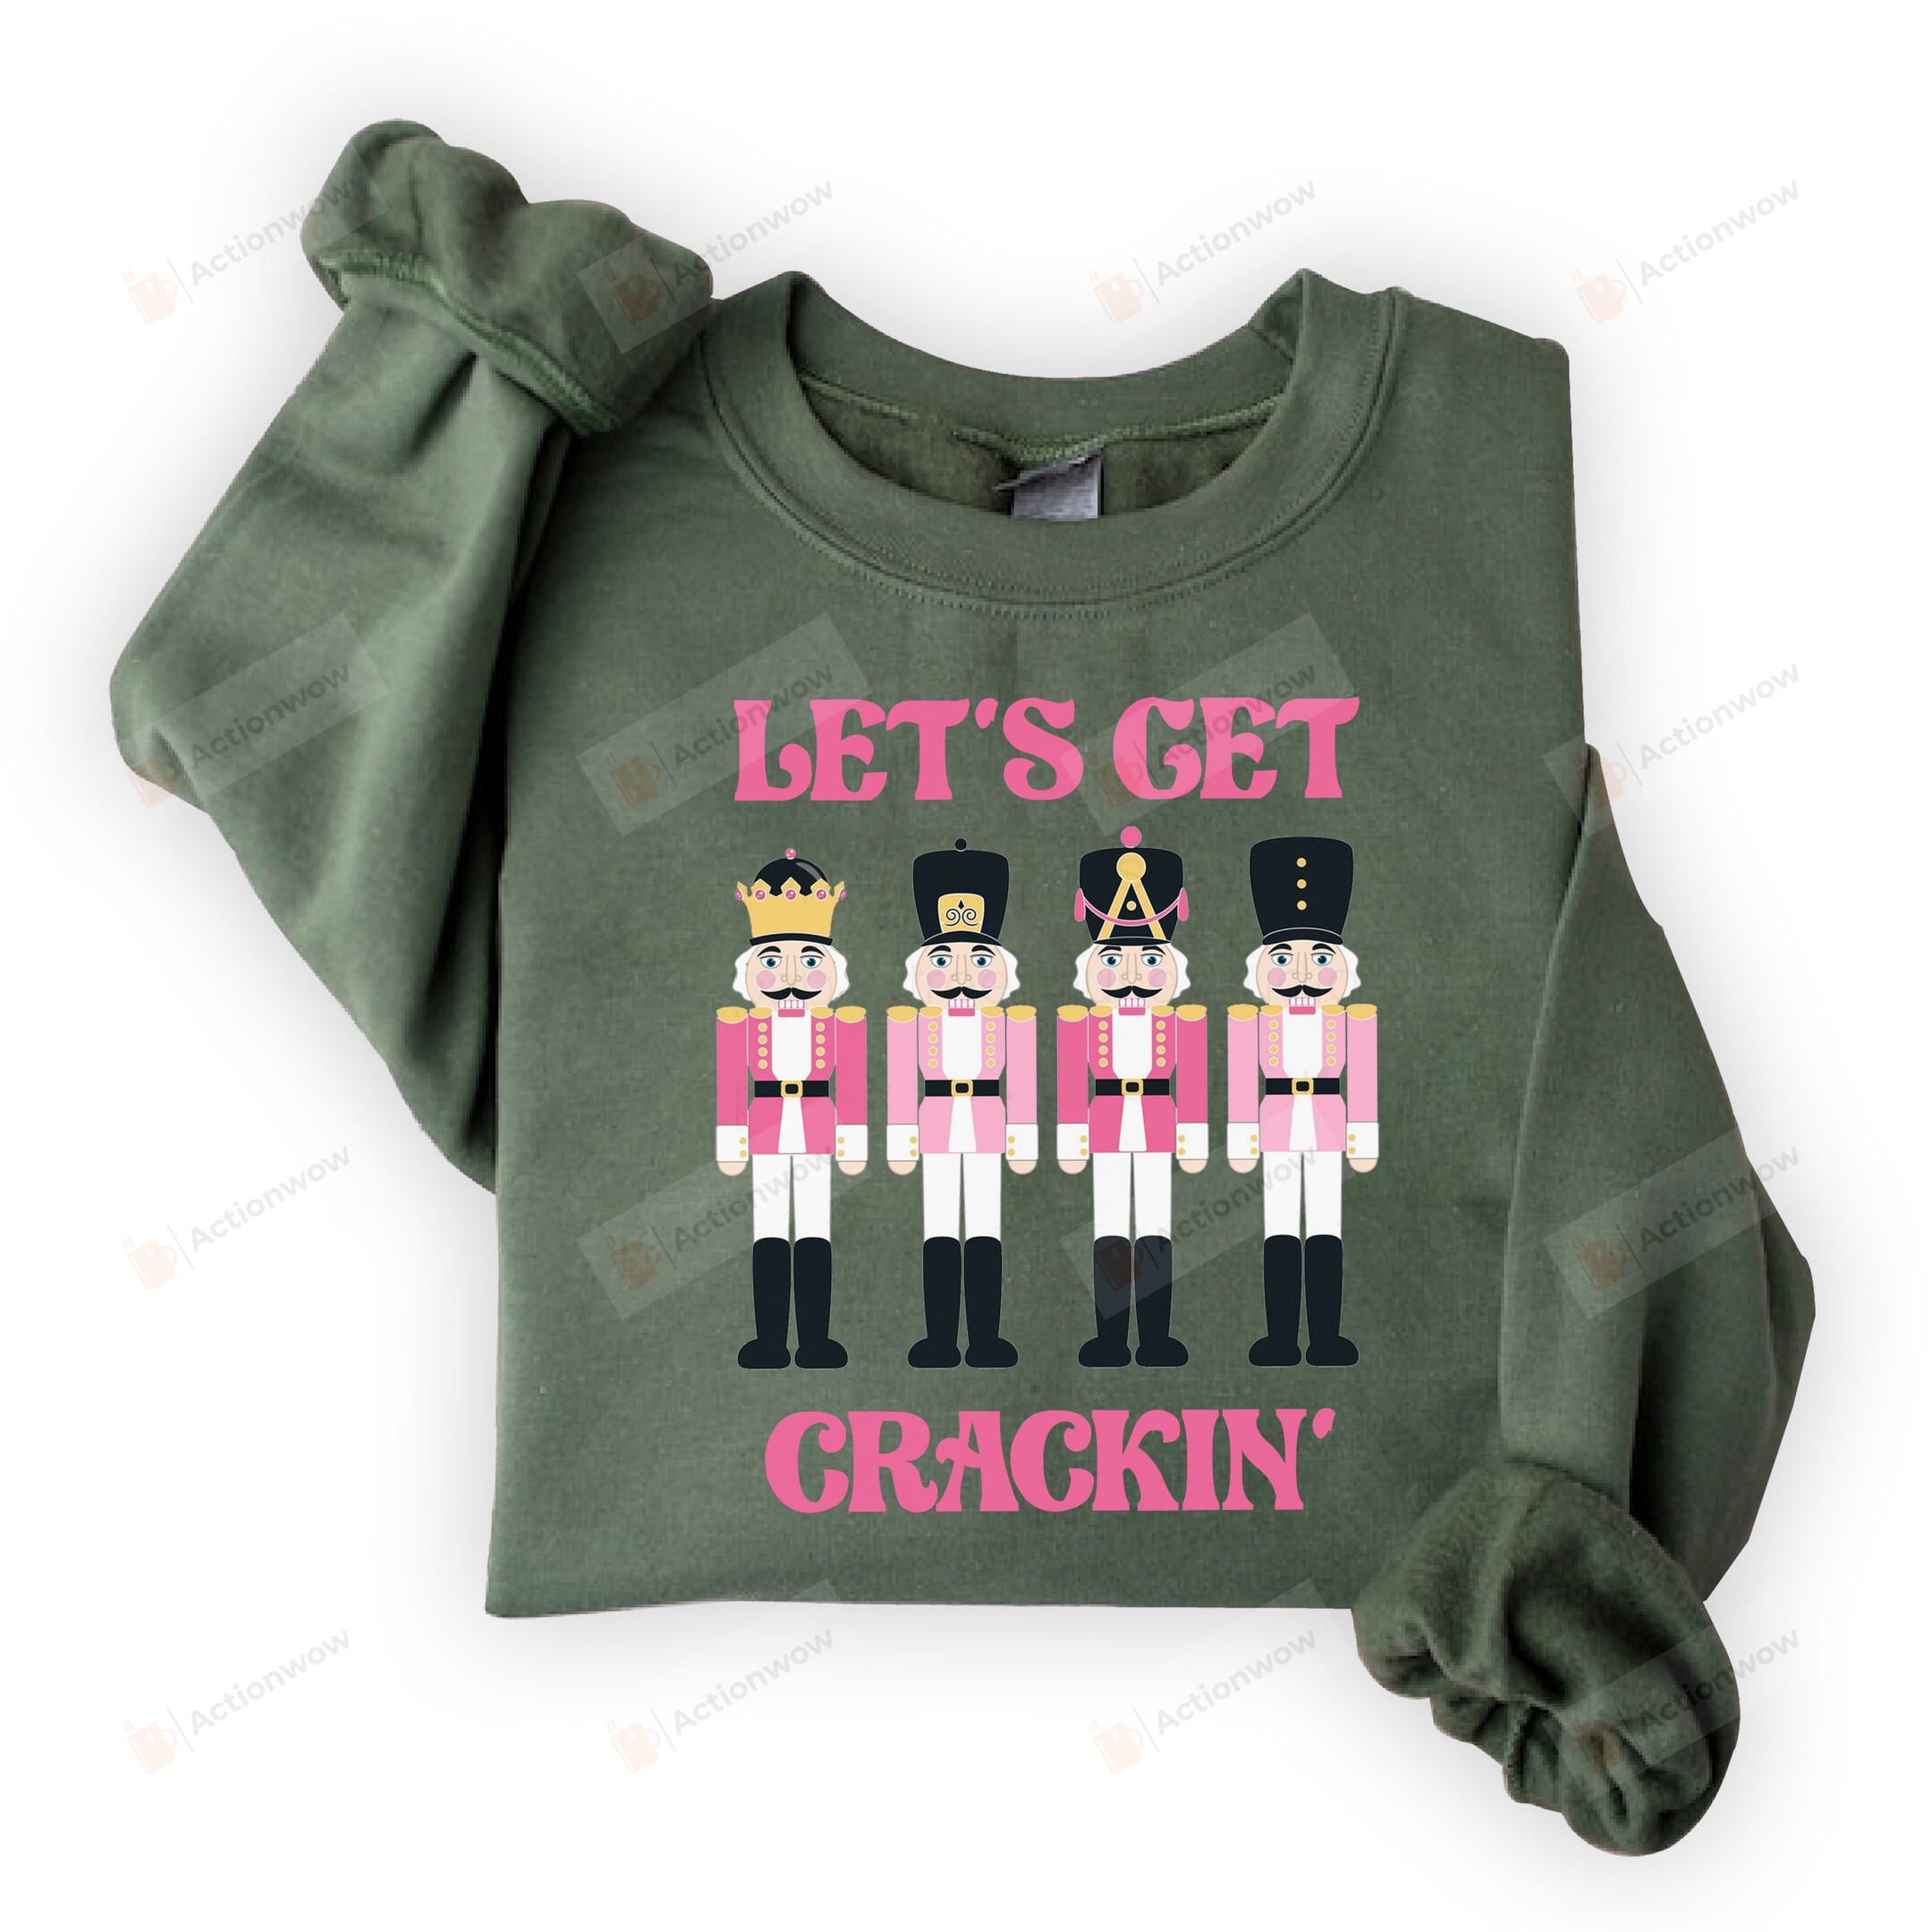 Let's Get Crackin' Sweatshirt, Christmas Gifts For Women For Men, Holiday T-Shirt Hoodie Sweatshirt Gifts On Christmas Day